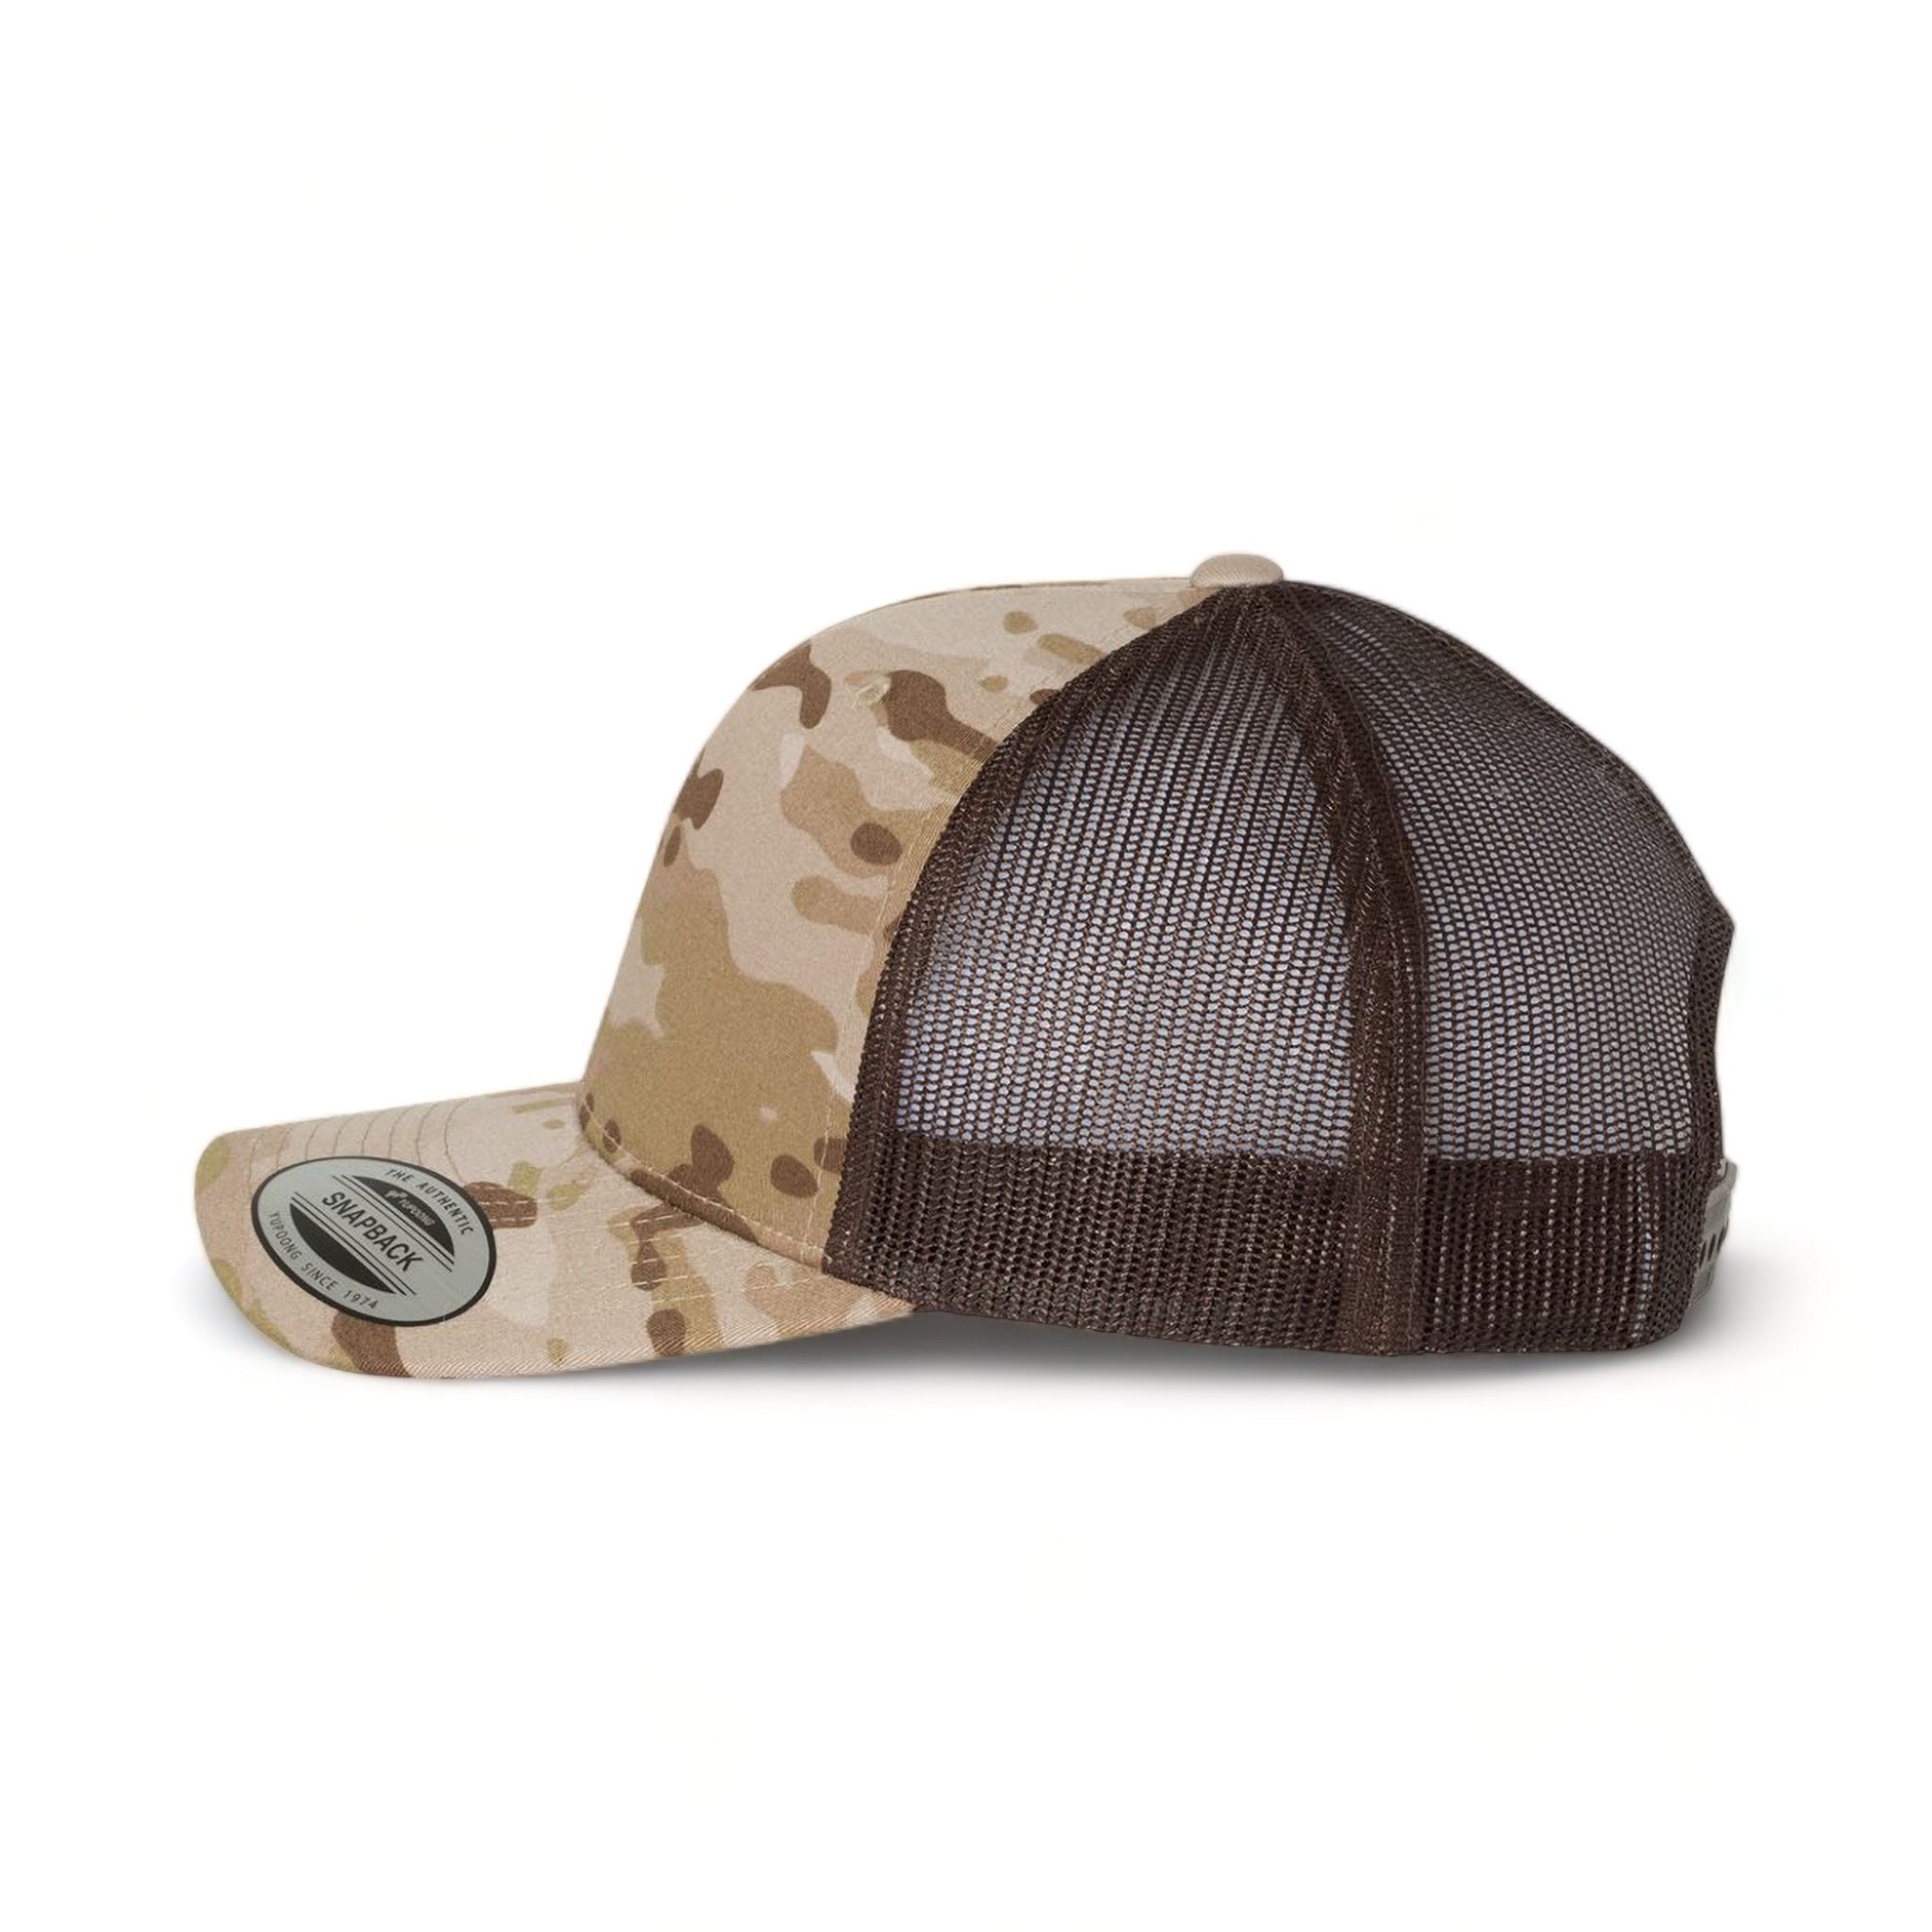 Side view of YP Classics 6606 custom hat in multicam arid and brown